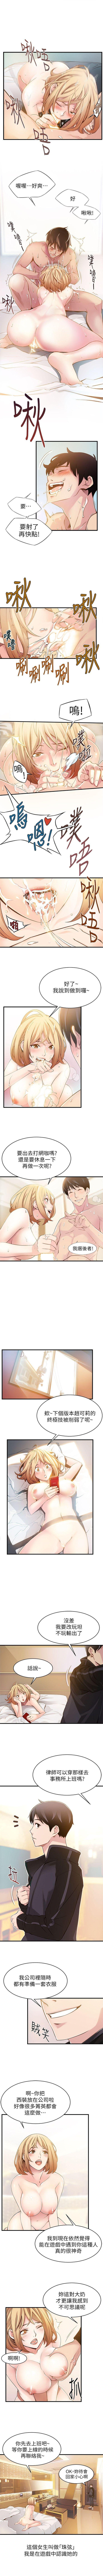 Pissing 弱點 1-94 官方中文（連載中） Female - Page 3